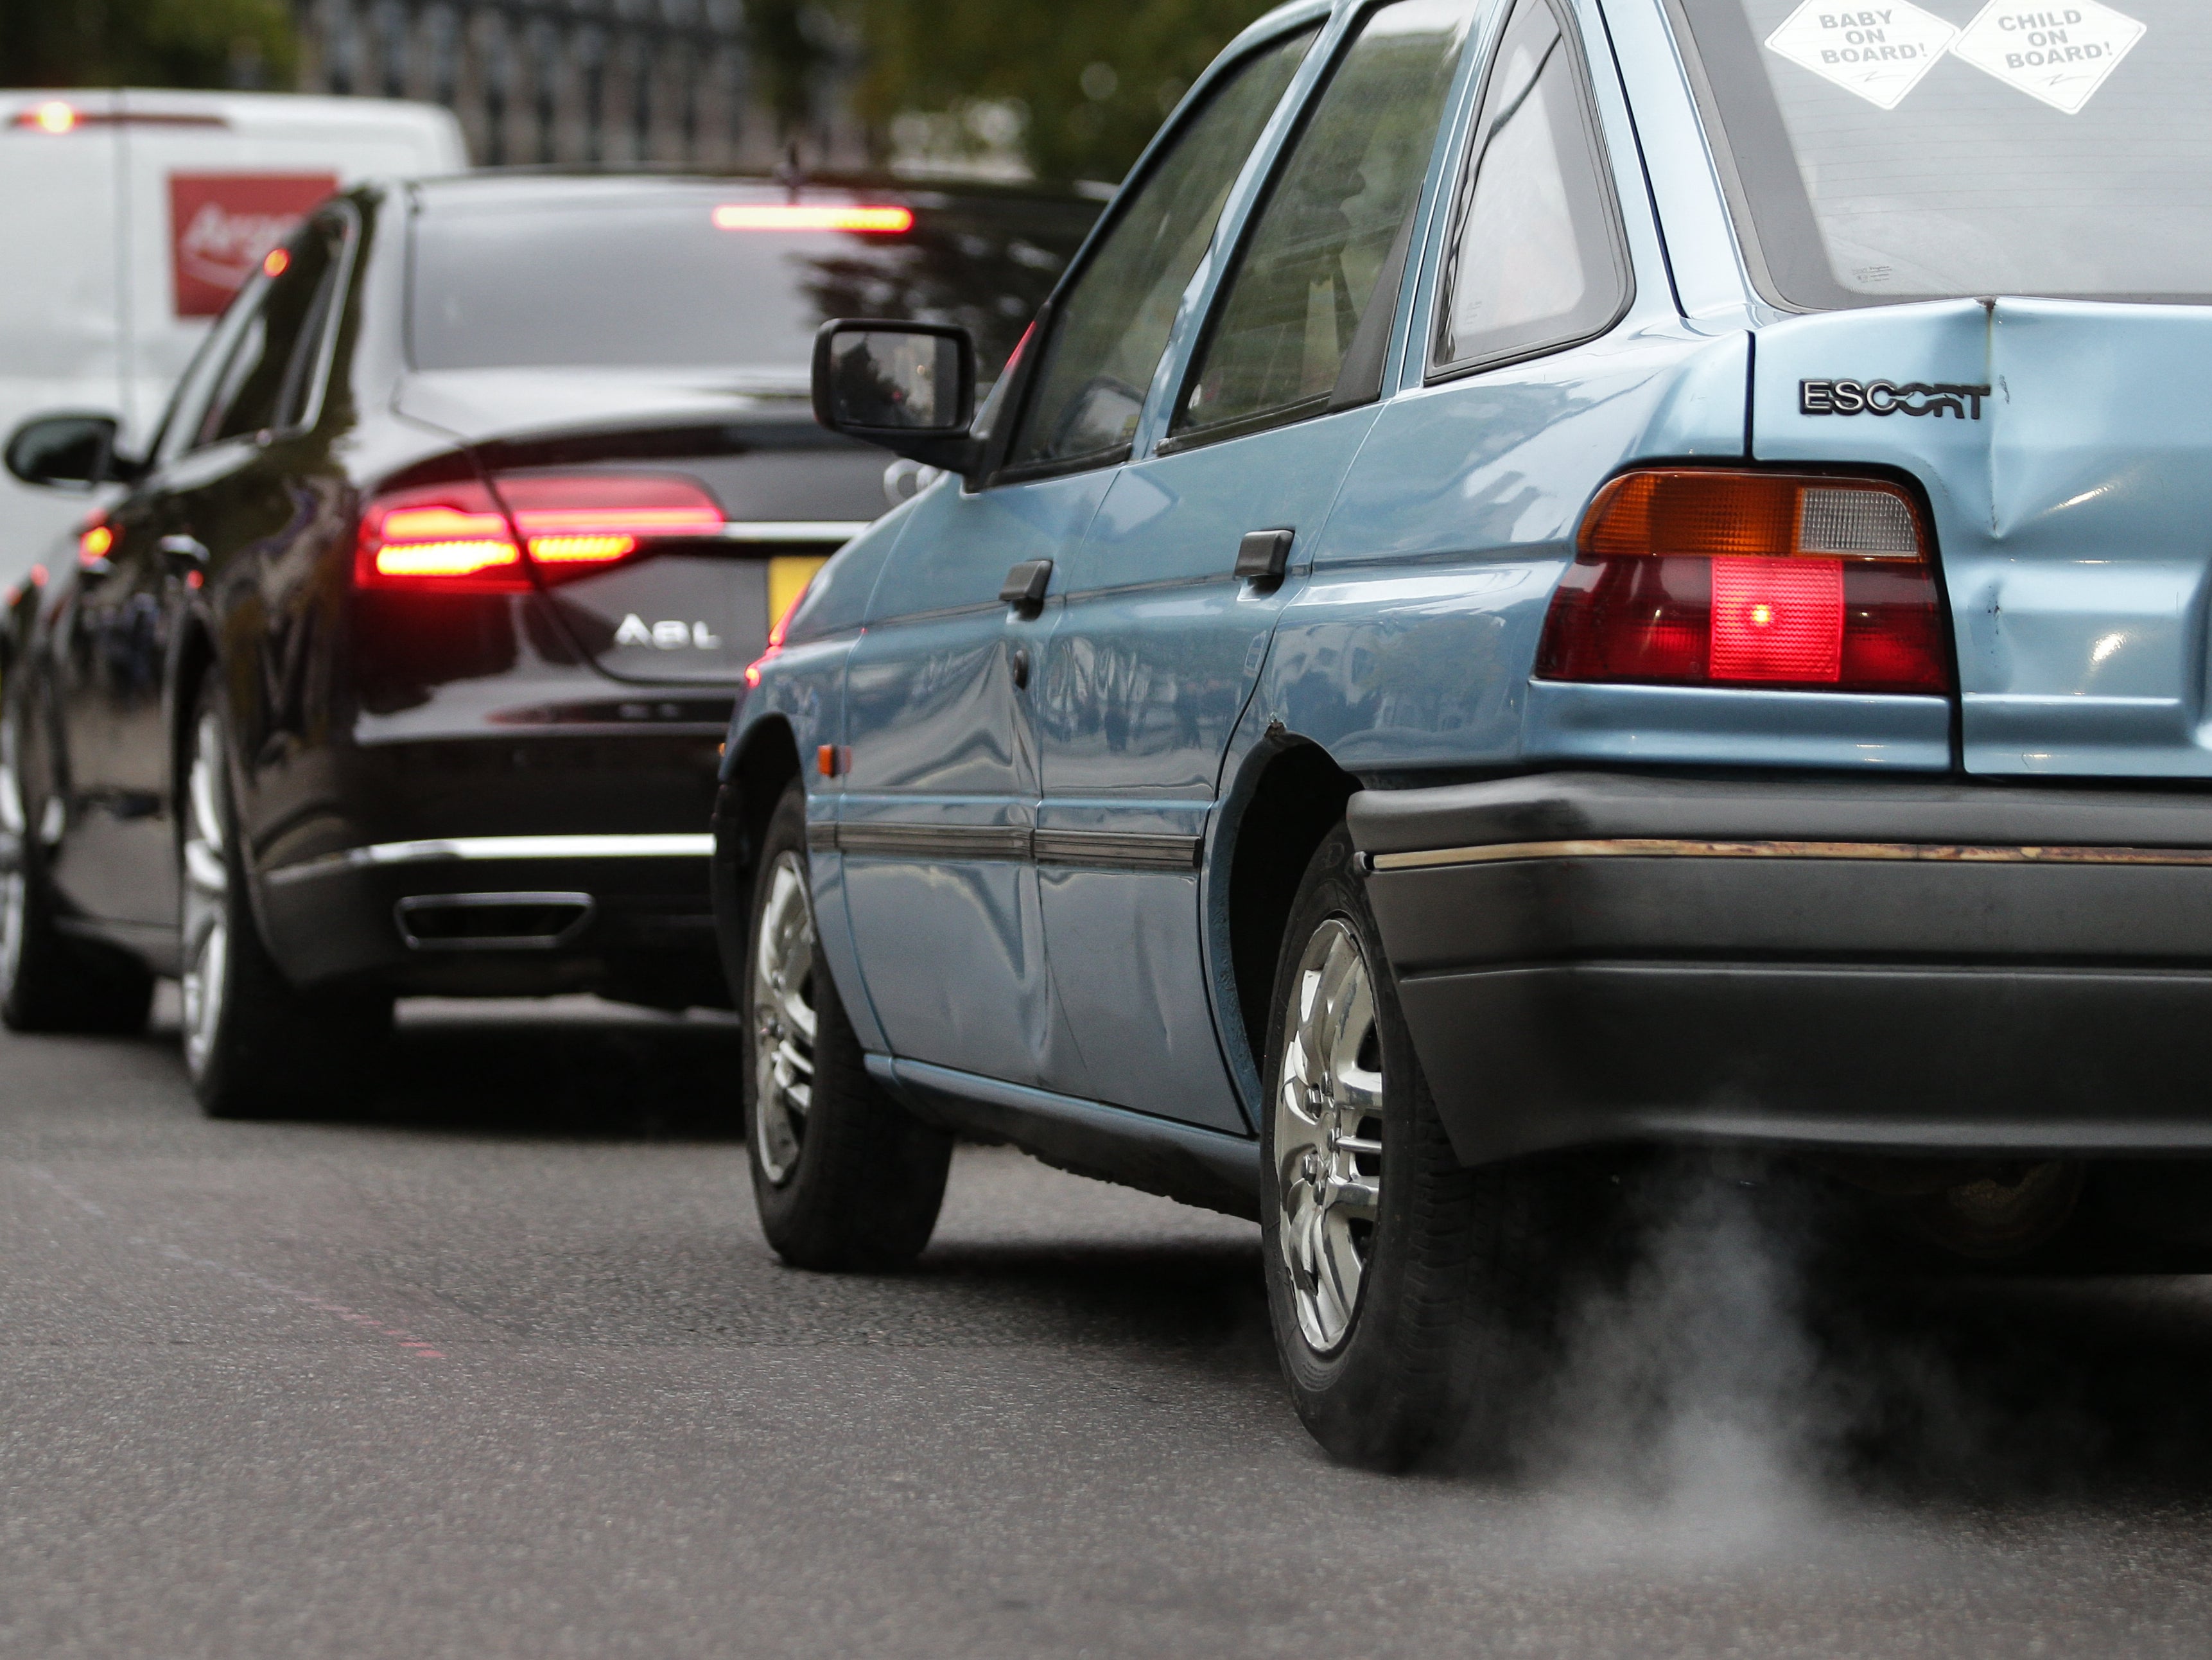 London’s mayor estimates traffic fumes account for 25 per cent of city’s carbon dioxide emissions